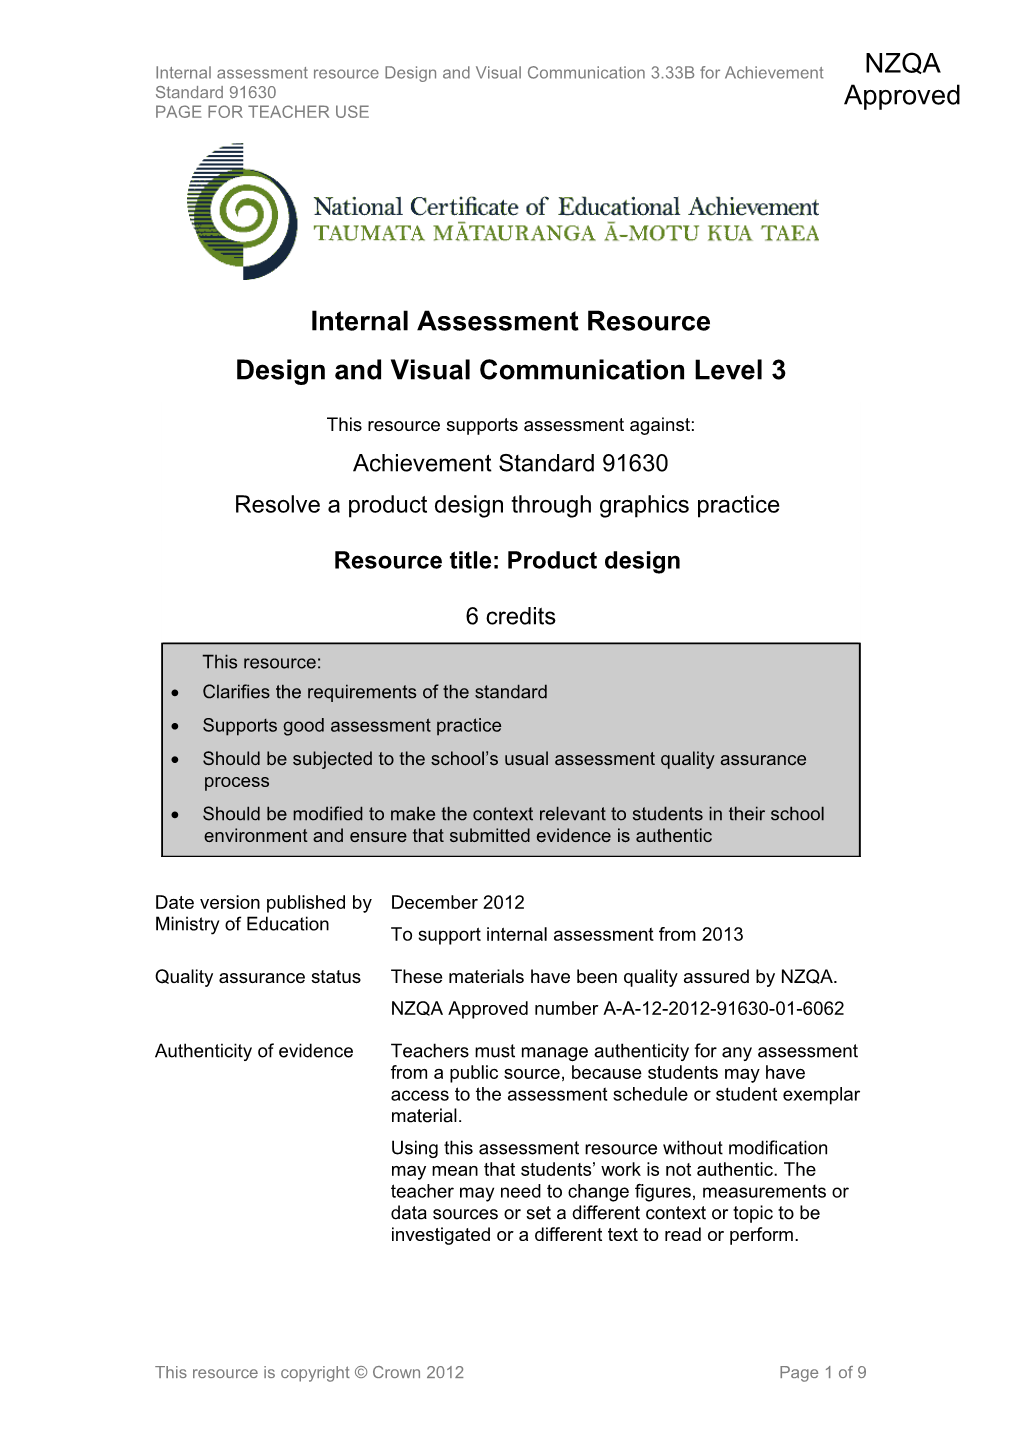 Level 3 Visual and Design Communication Internal Assessment Resource